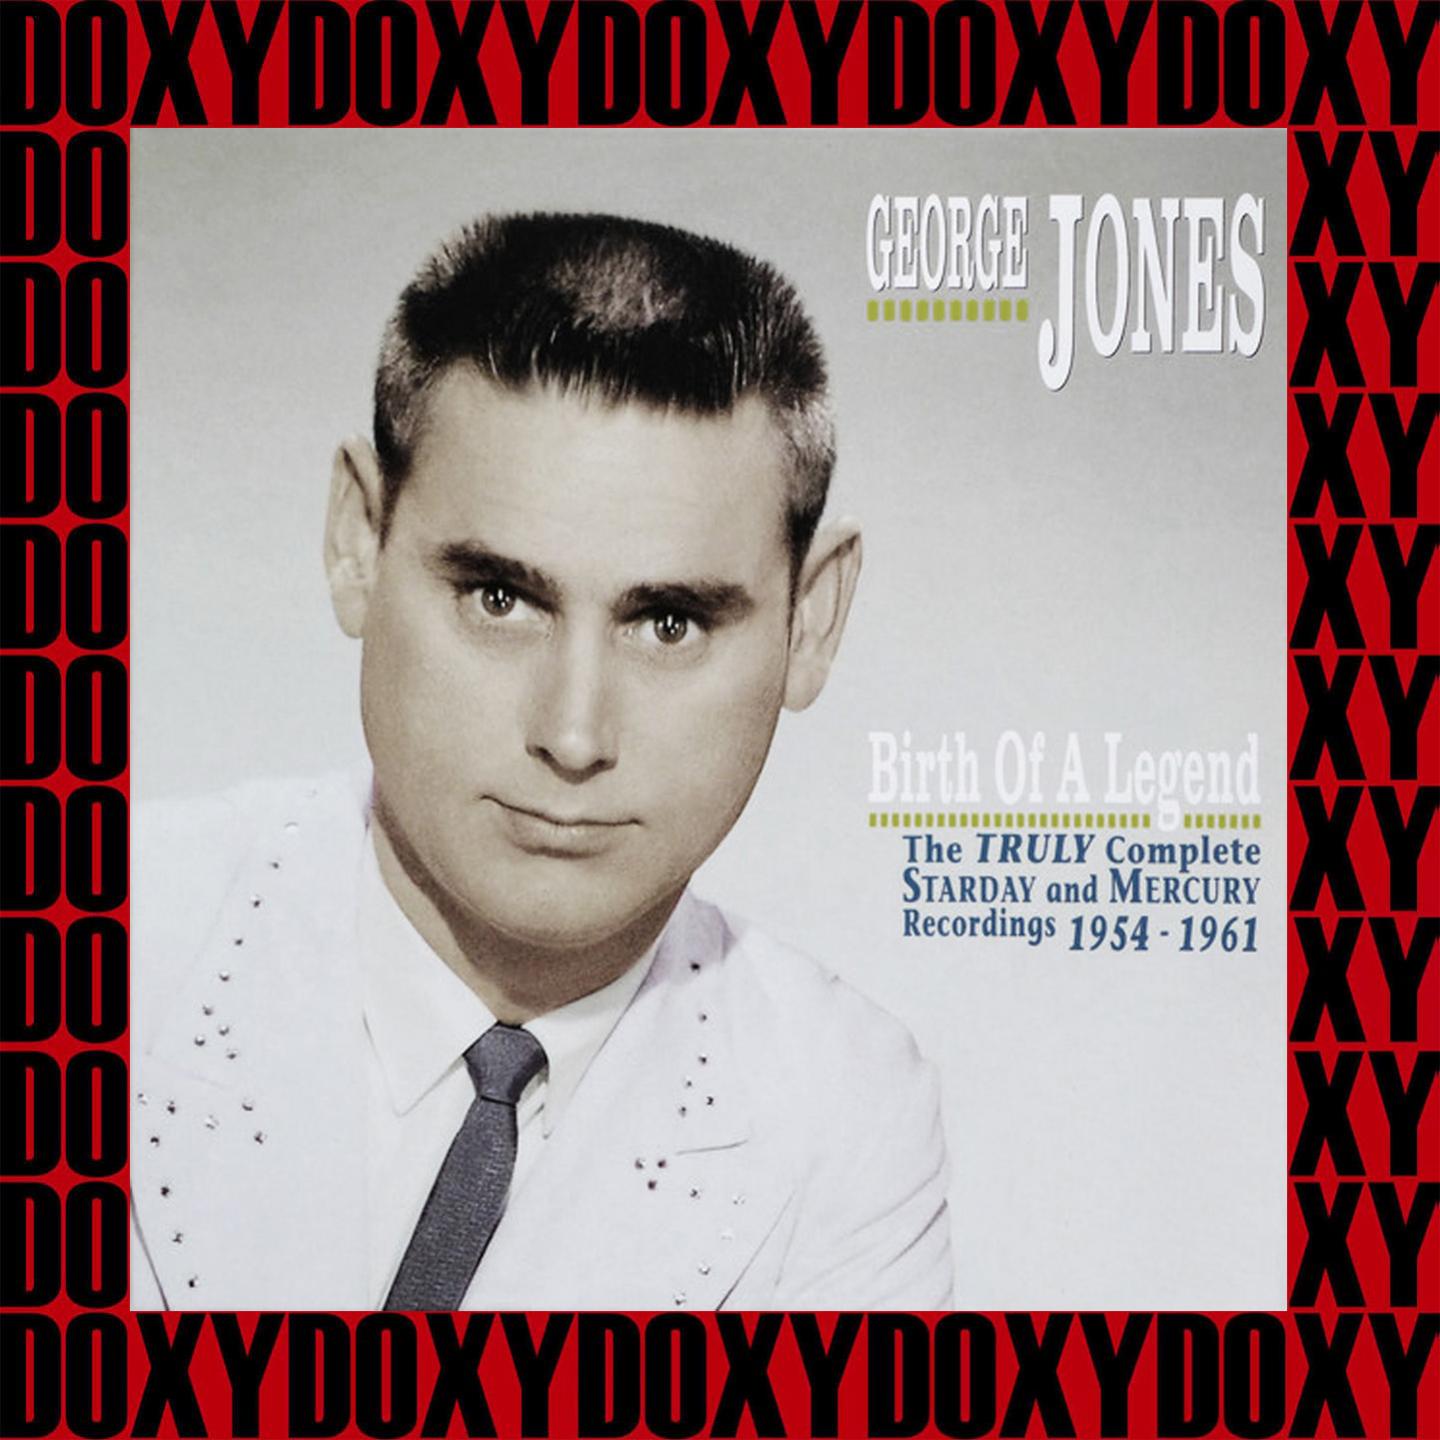 Birth Of A Legend,1954-1961 Vol. 6 (Remastered Version) (Doxy Collection)